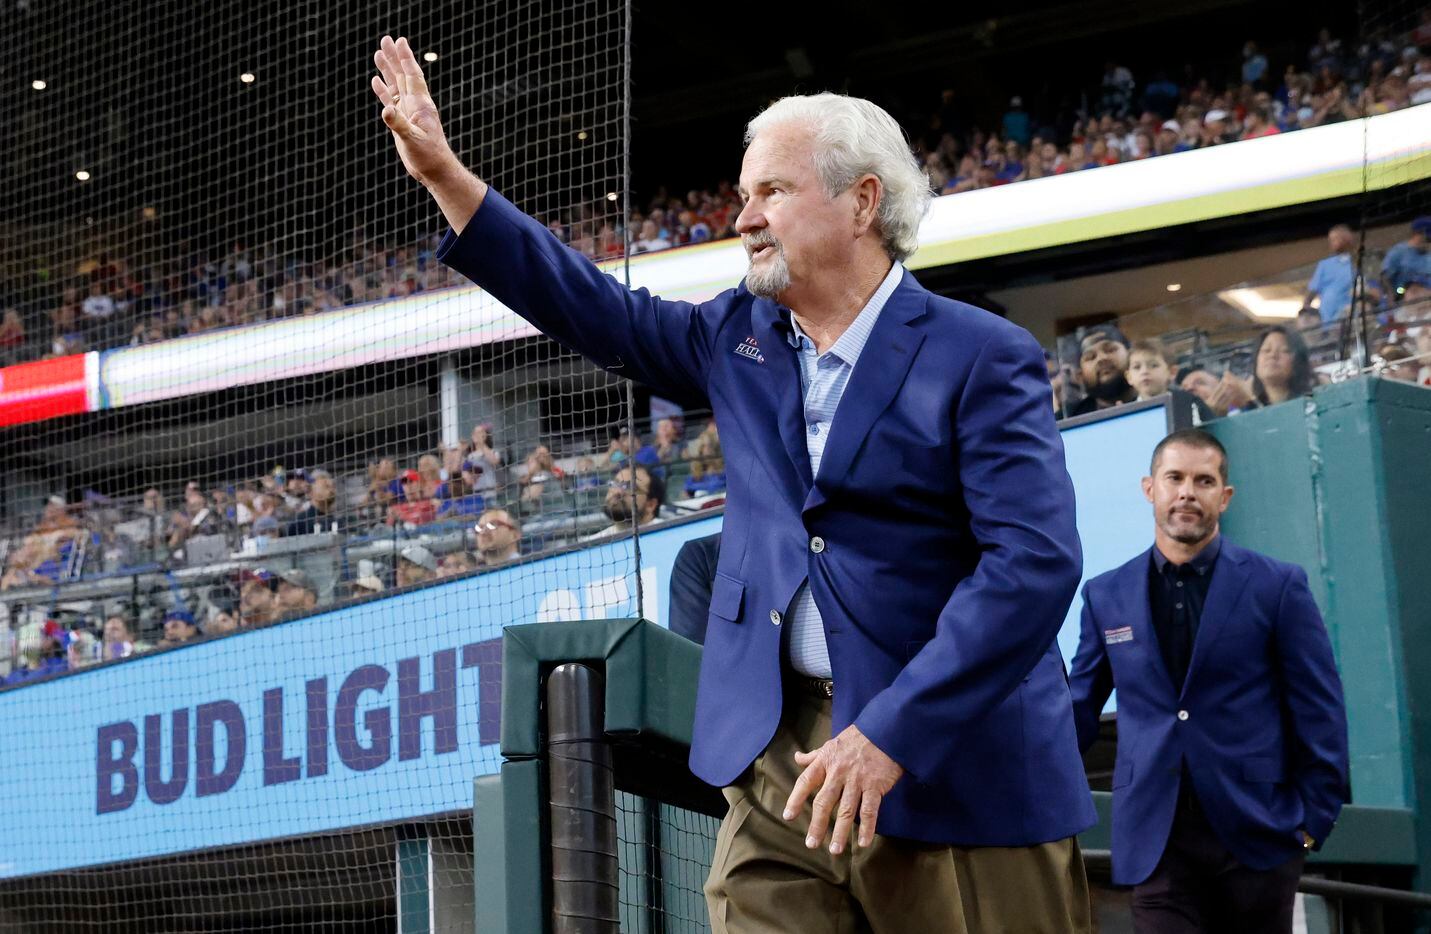 Texas Rangers Baseball Hall of Fame member Jim Sundberg waves to the crowd as he's introduced before the induction ceremony for Adrian Beltre and Chuck Morgan at Globe Life Field in Arlington, Saturday, August 14, 2021.(Tom Fox/The Dallas Morning News)